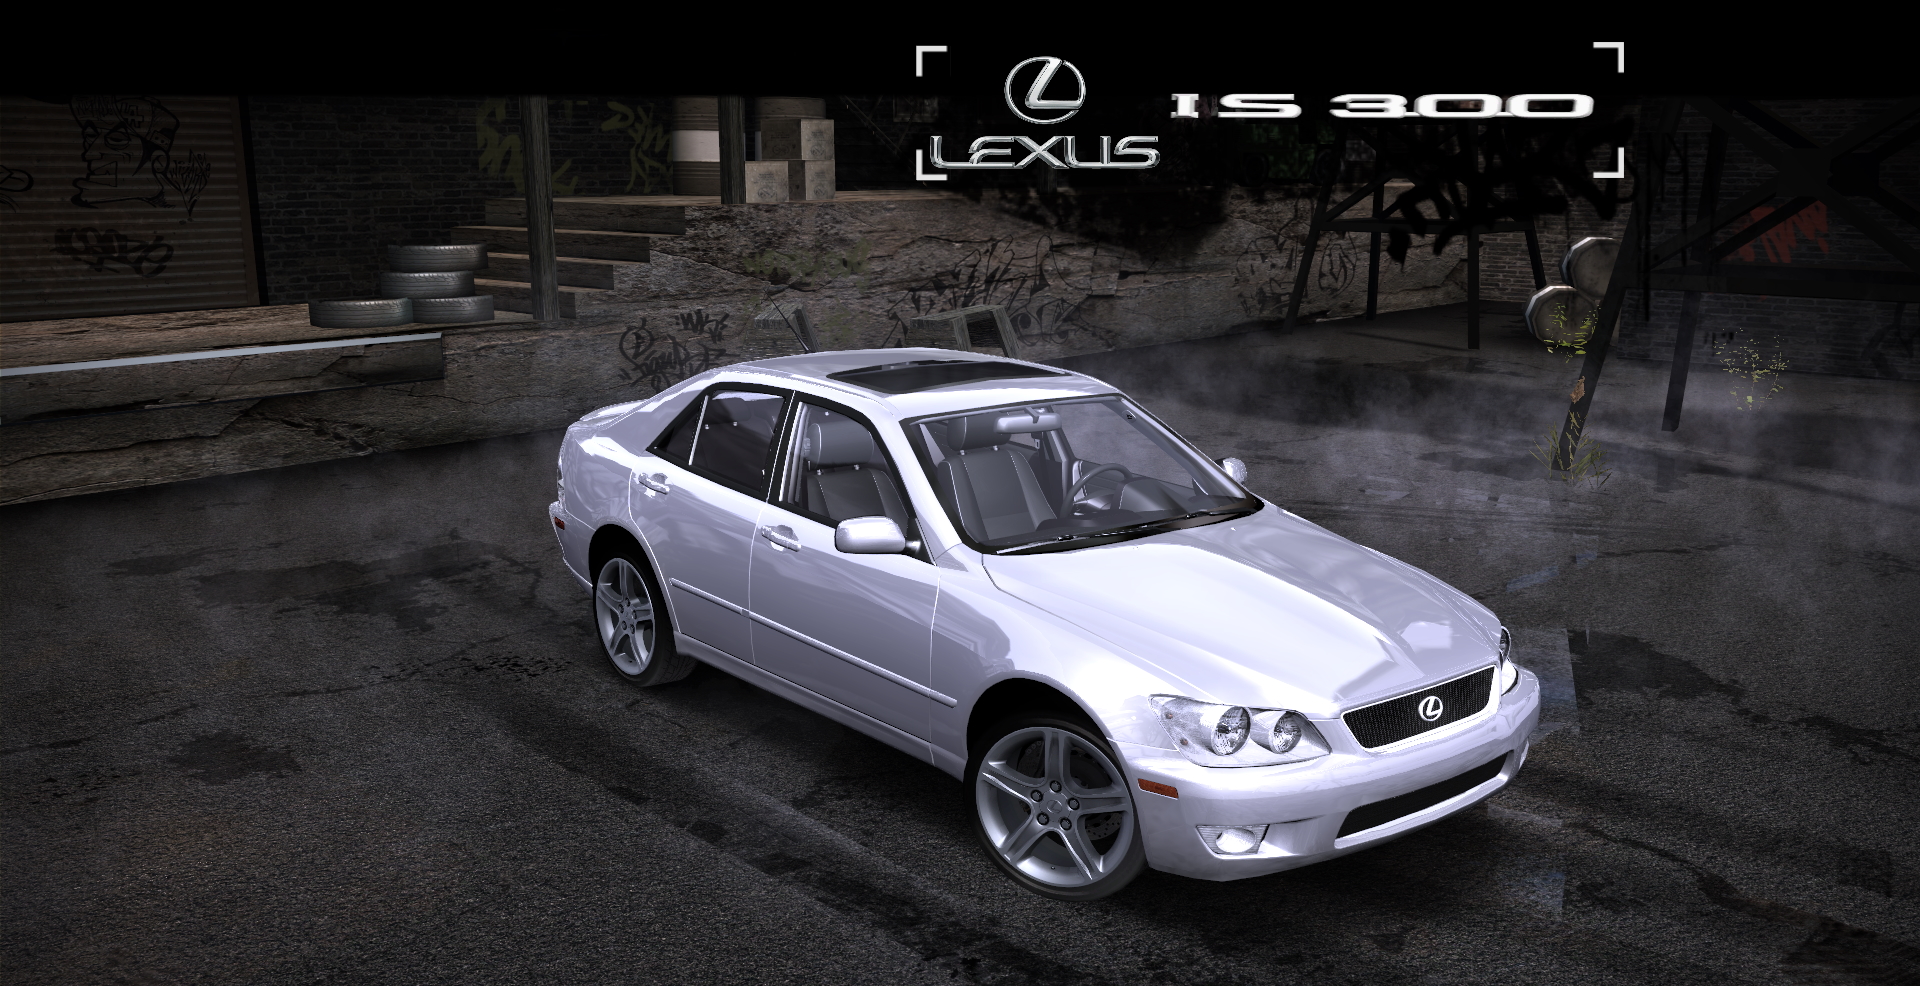 Need For Speed Most Wanted 2003 Lexus IS300